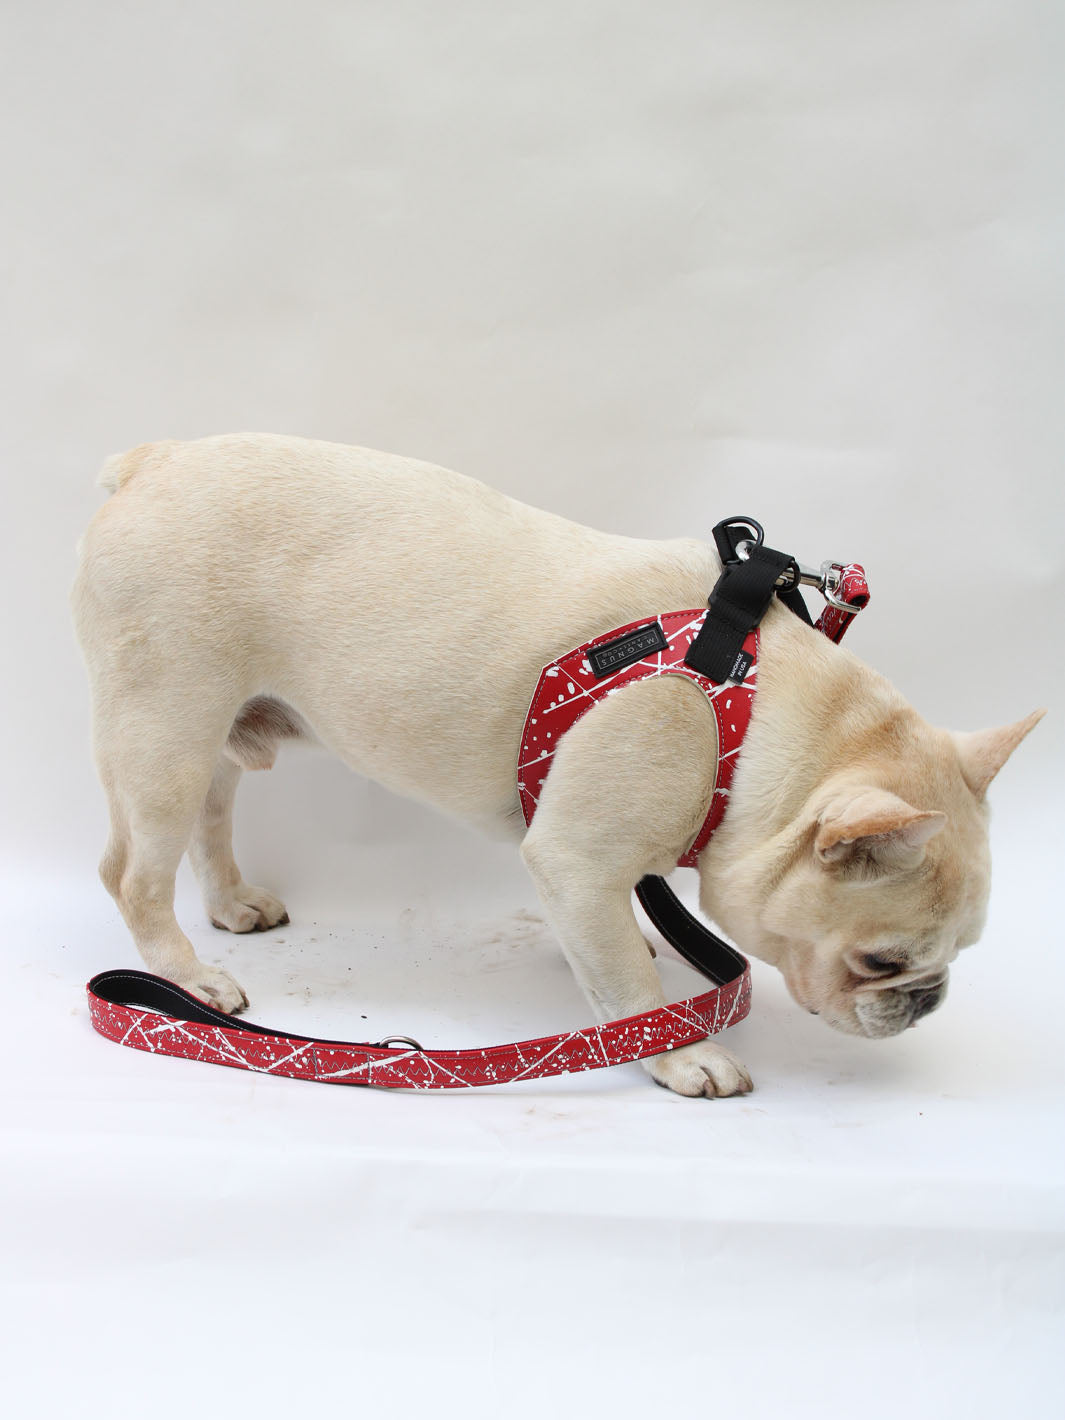 Cream bulldog walking around a photoset and wearing a red vegan leather frenchie harness.